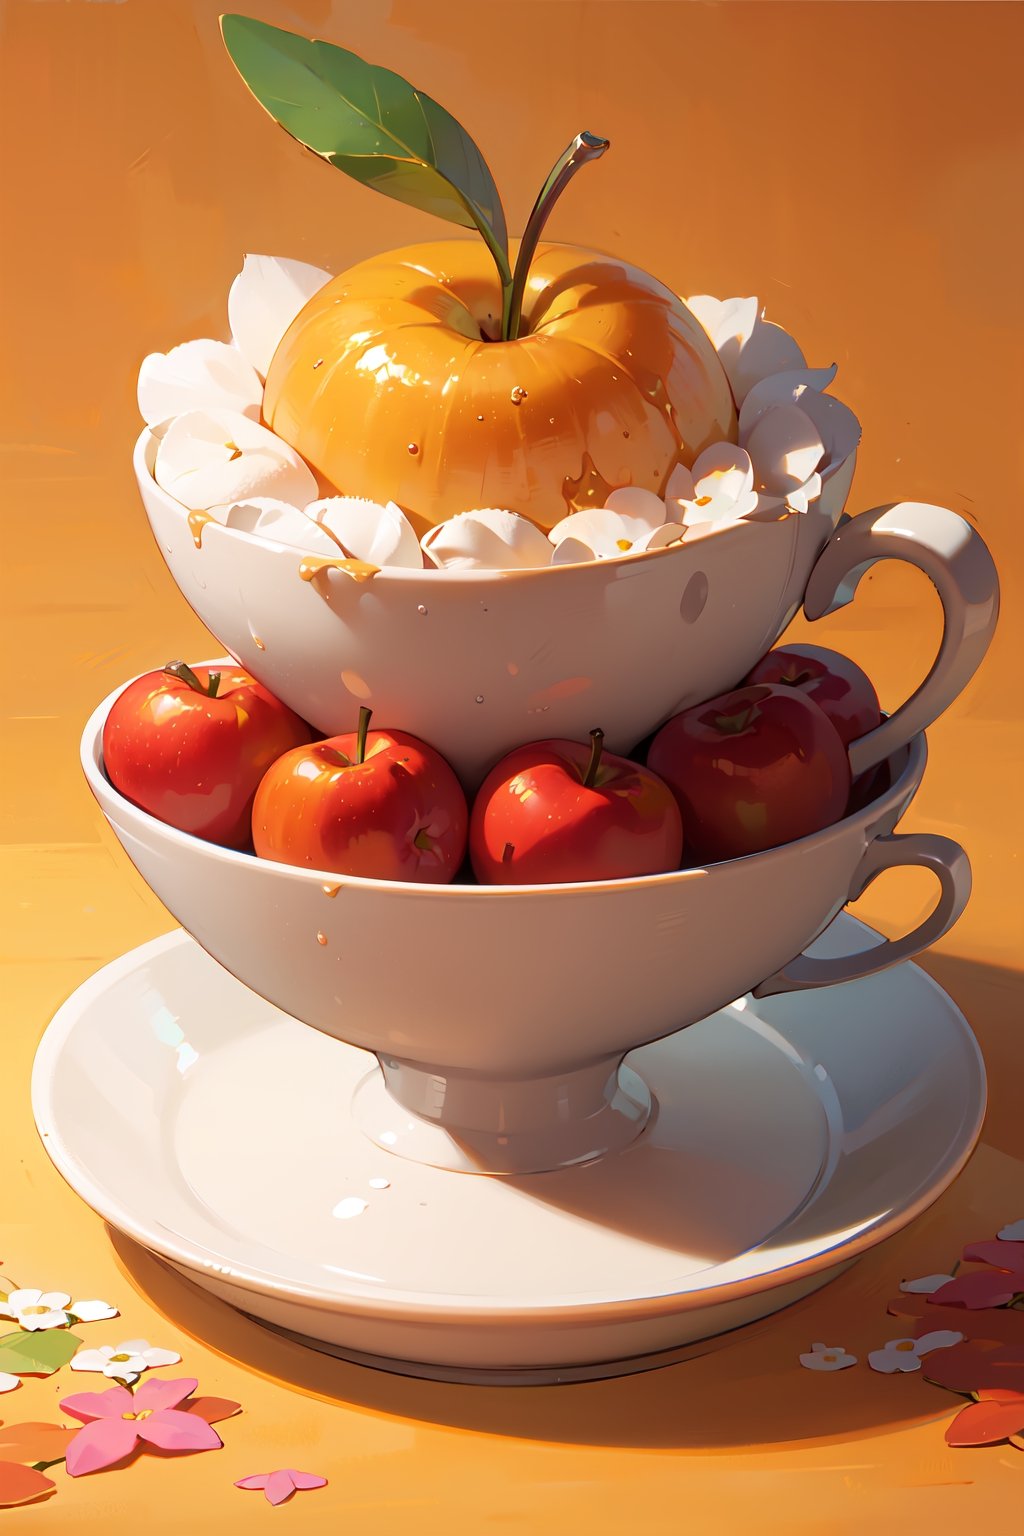 Apple, fruits on plate, cup, detail, floral orange background, no people,ISO_SHOP